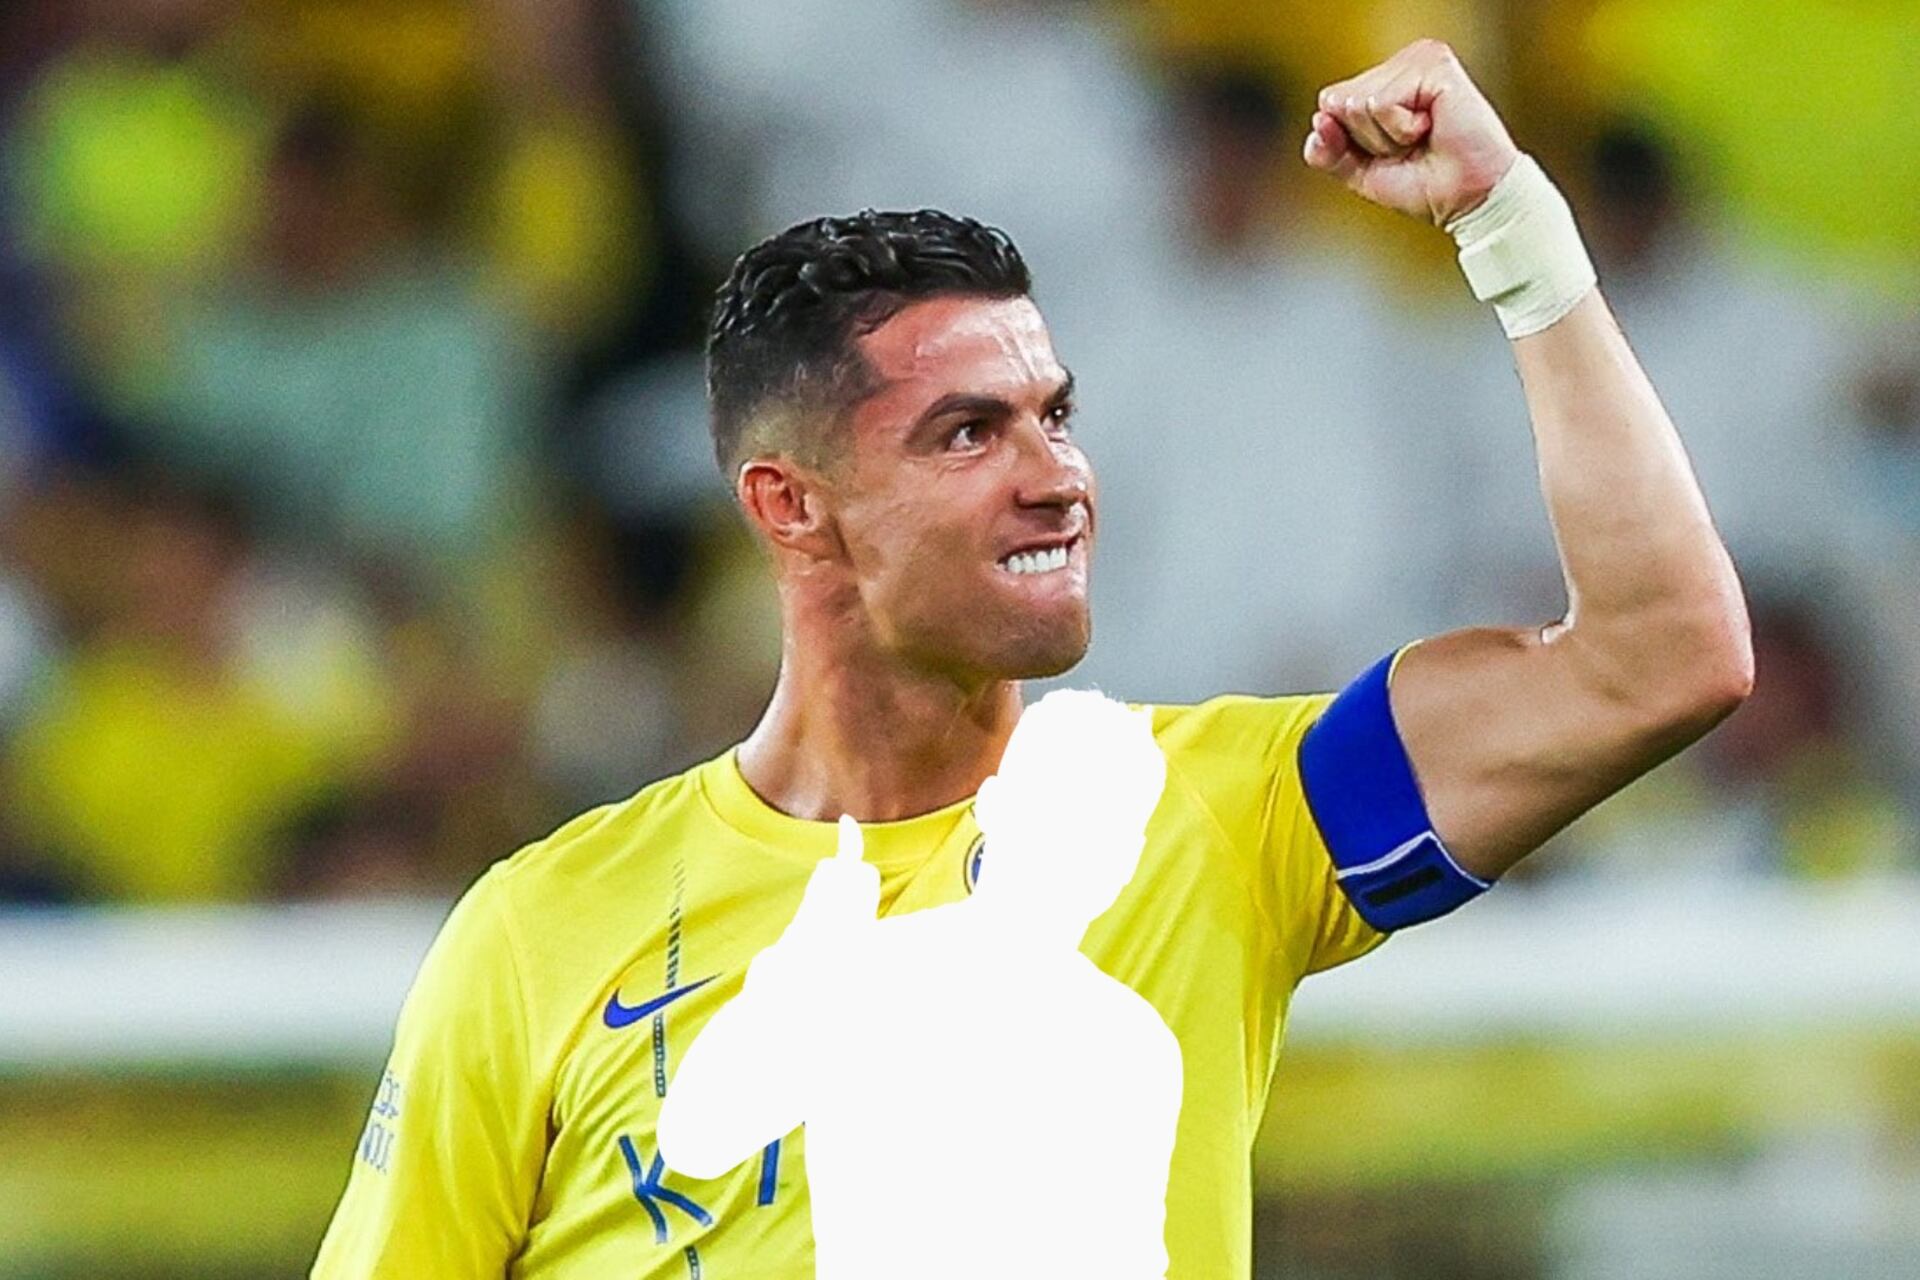 Cristiano's request to stay at Al Nassr, the teammate with whom he'd shared a dressing room & wants to bring to Saudi